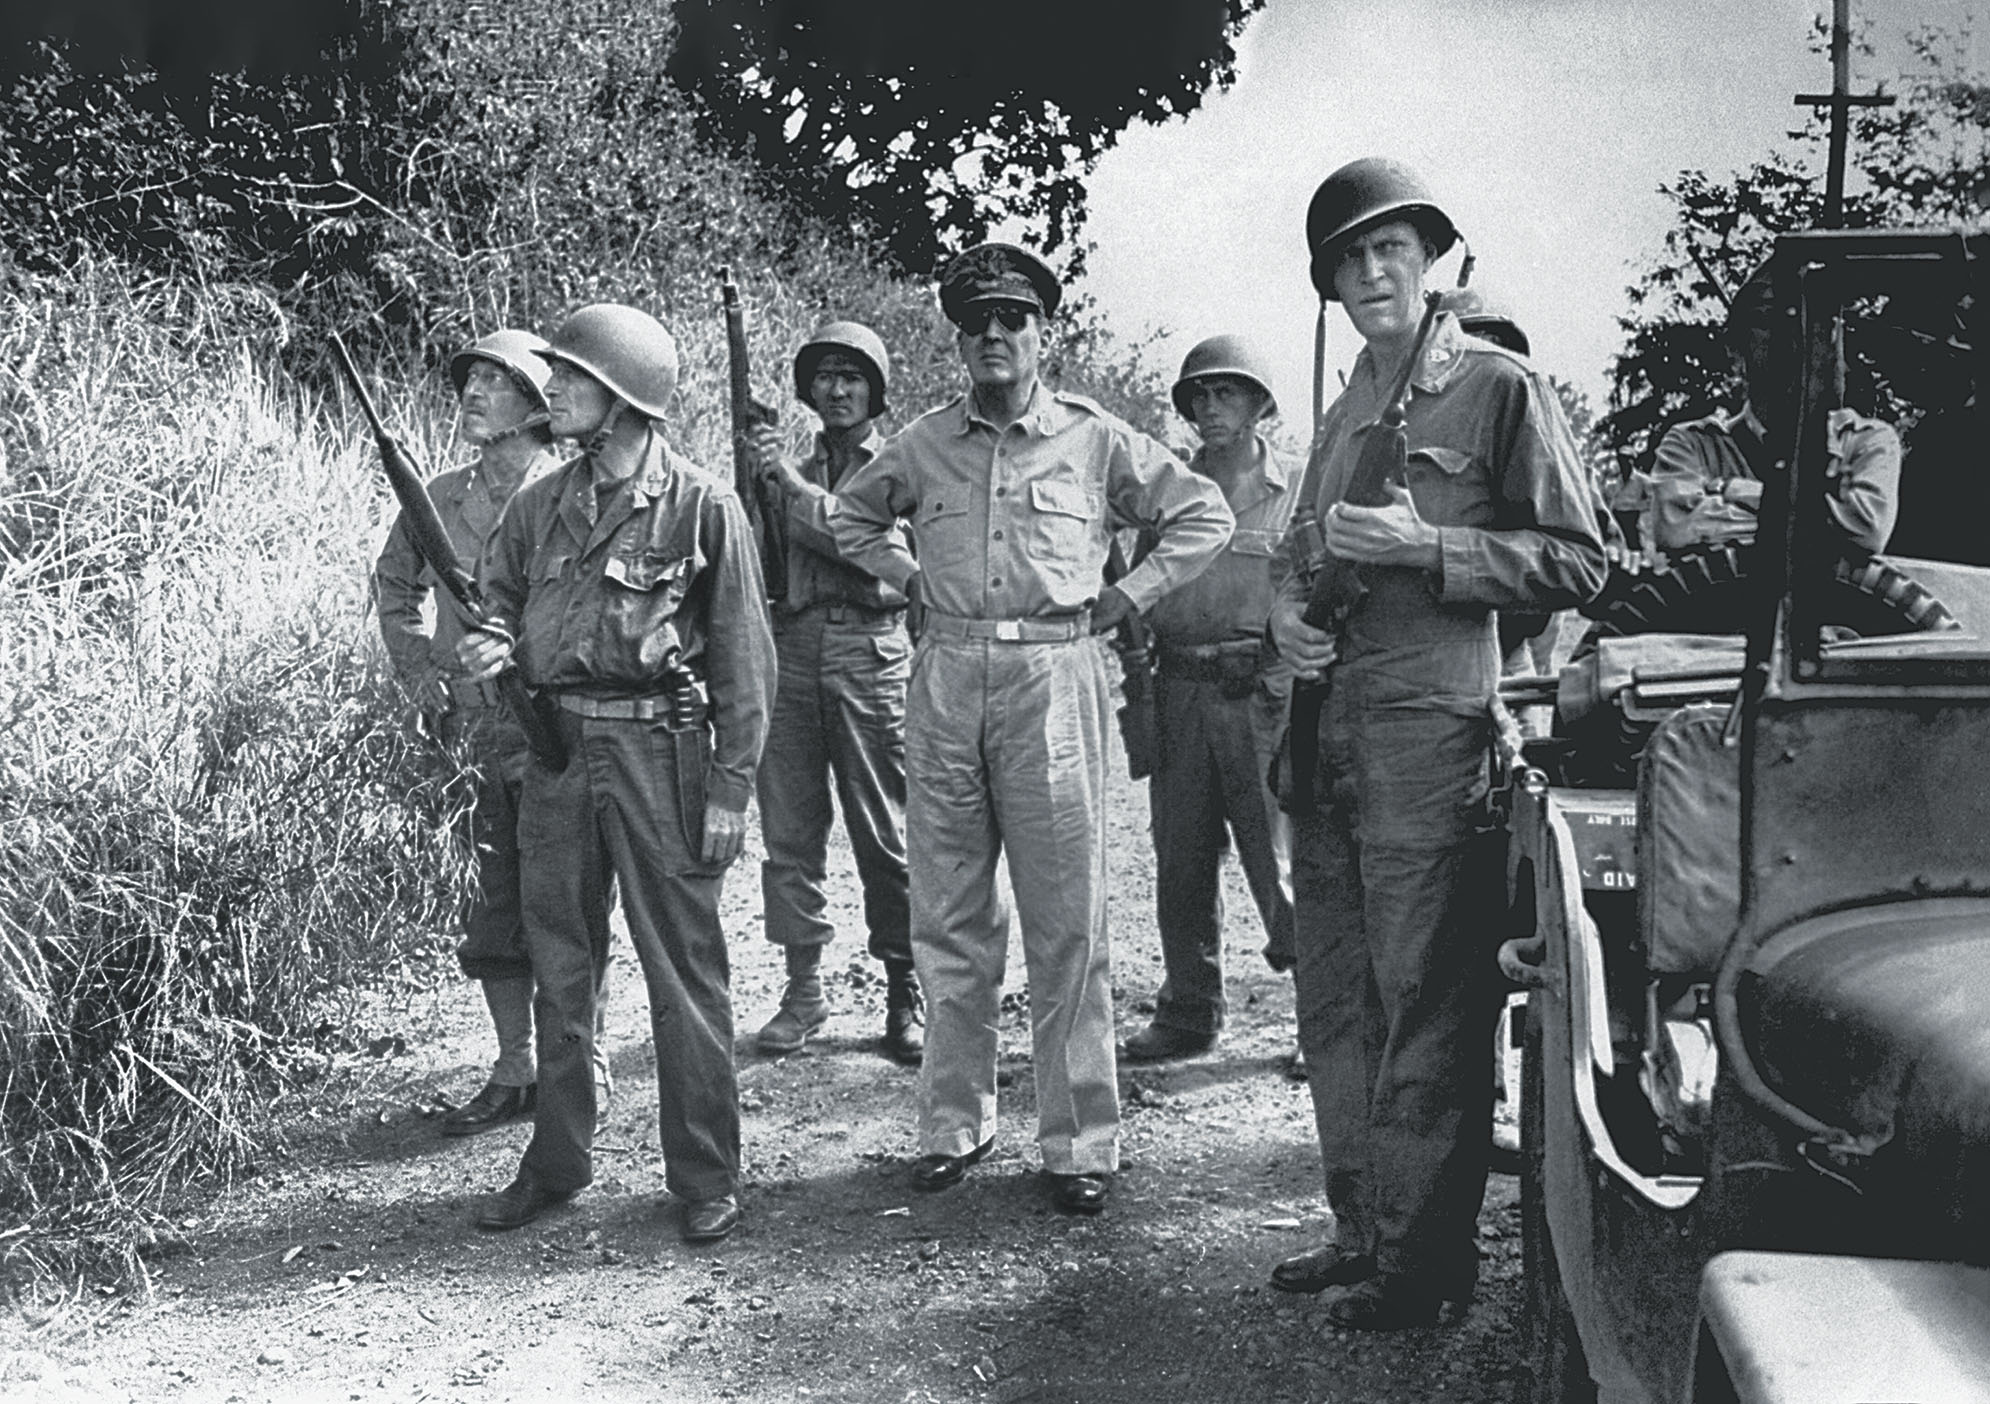 Surrounded by members of his personal protective detail, General of the Army Douglas MacArthur surveys Manila before entering in 1945 / Getty Images